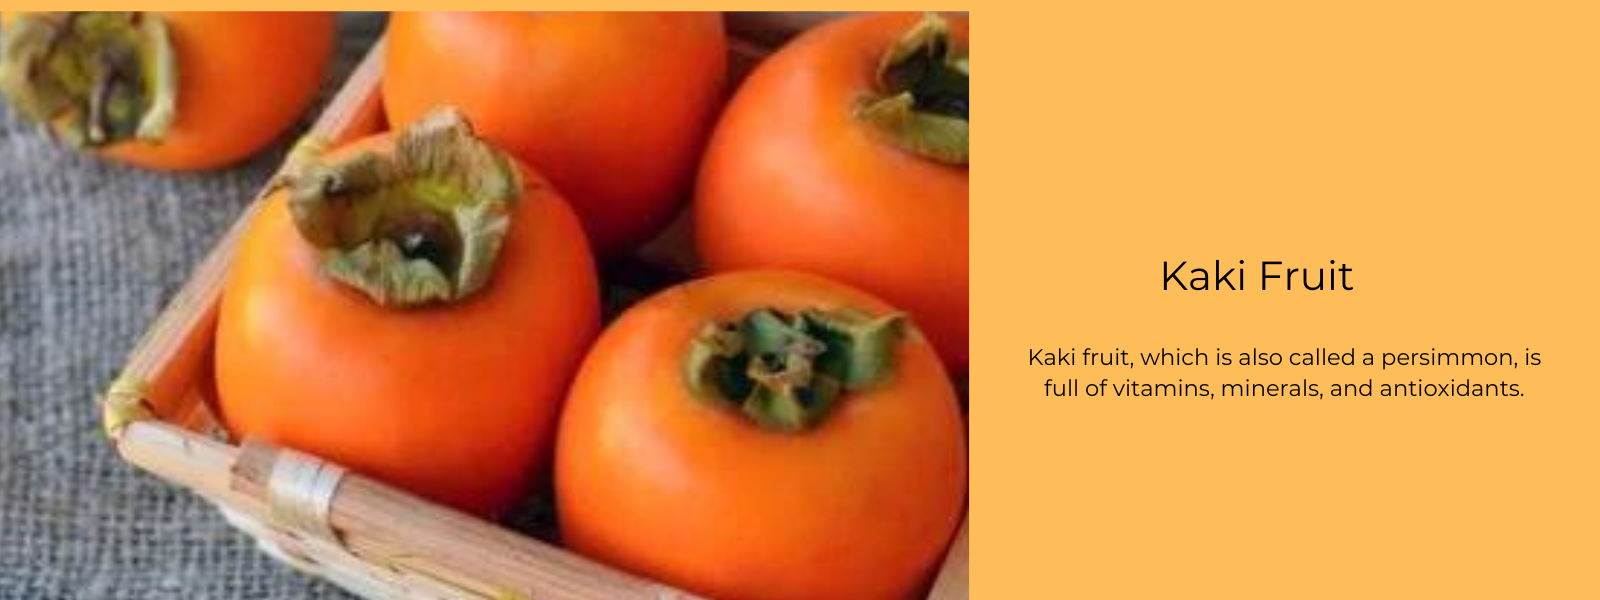 Kaki Fruit Photos, Images and Pictures